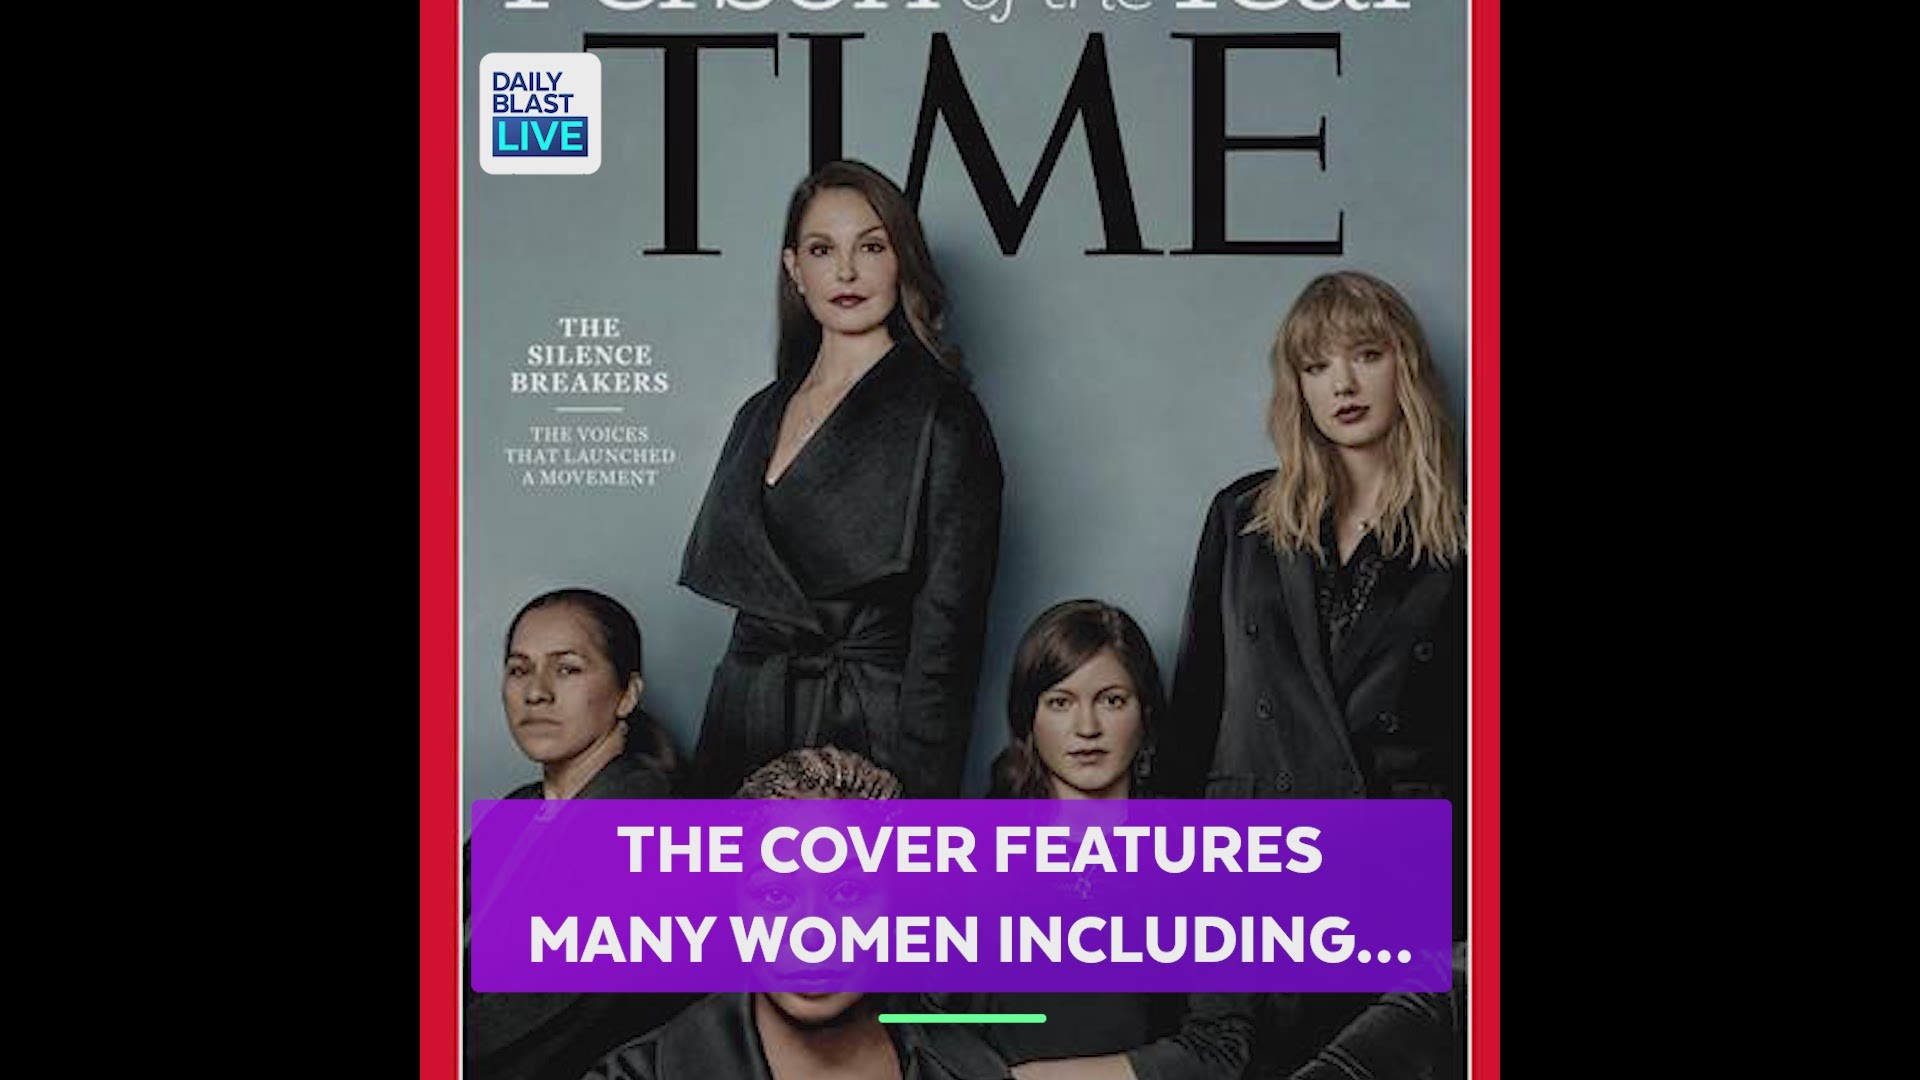 Time Magazine named the "The Silence Breakers" as the 2017 Person of the Year.